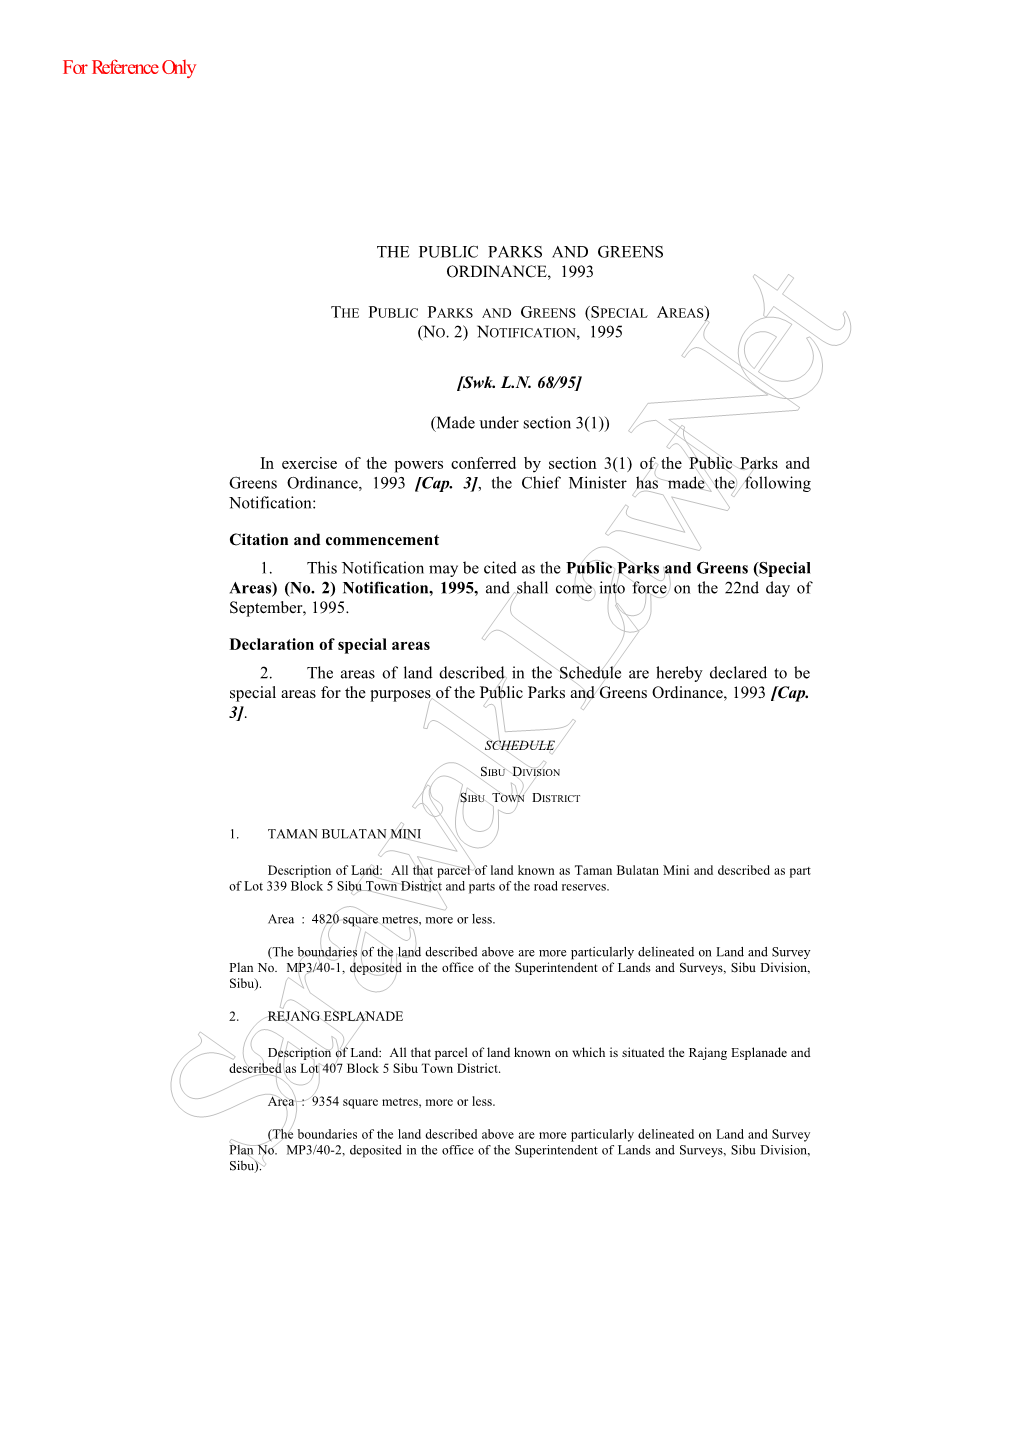 The Public Parks and Greens Ordinance, 1993